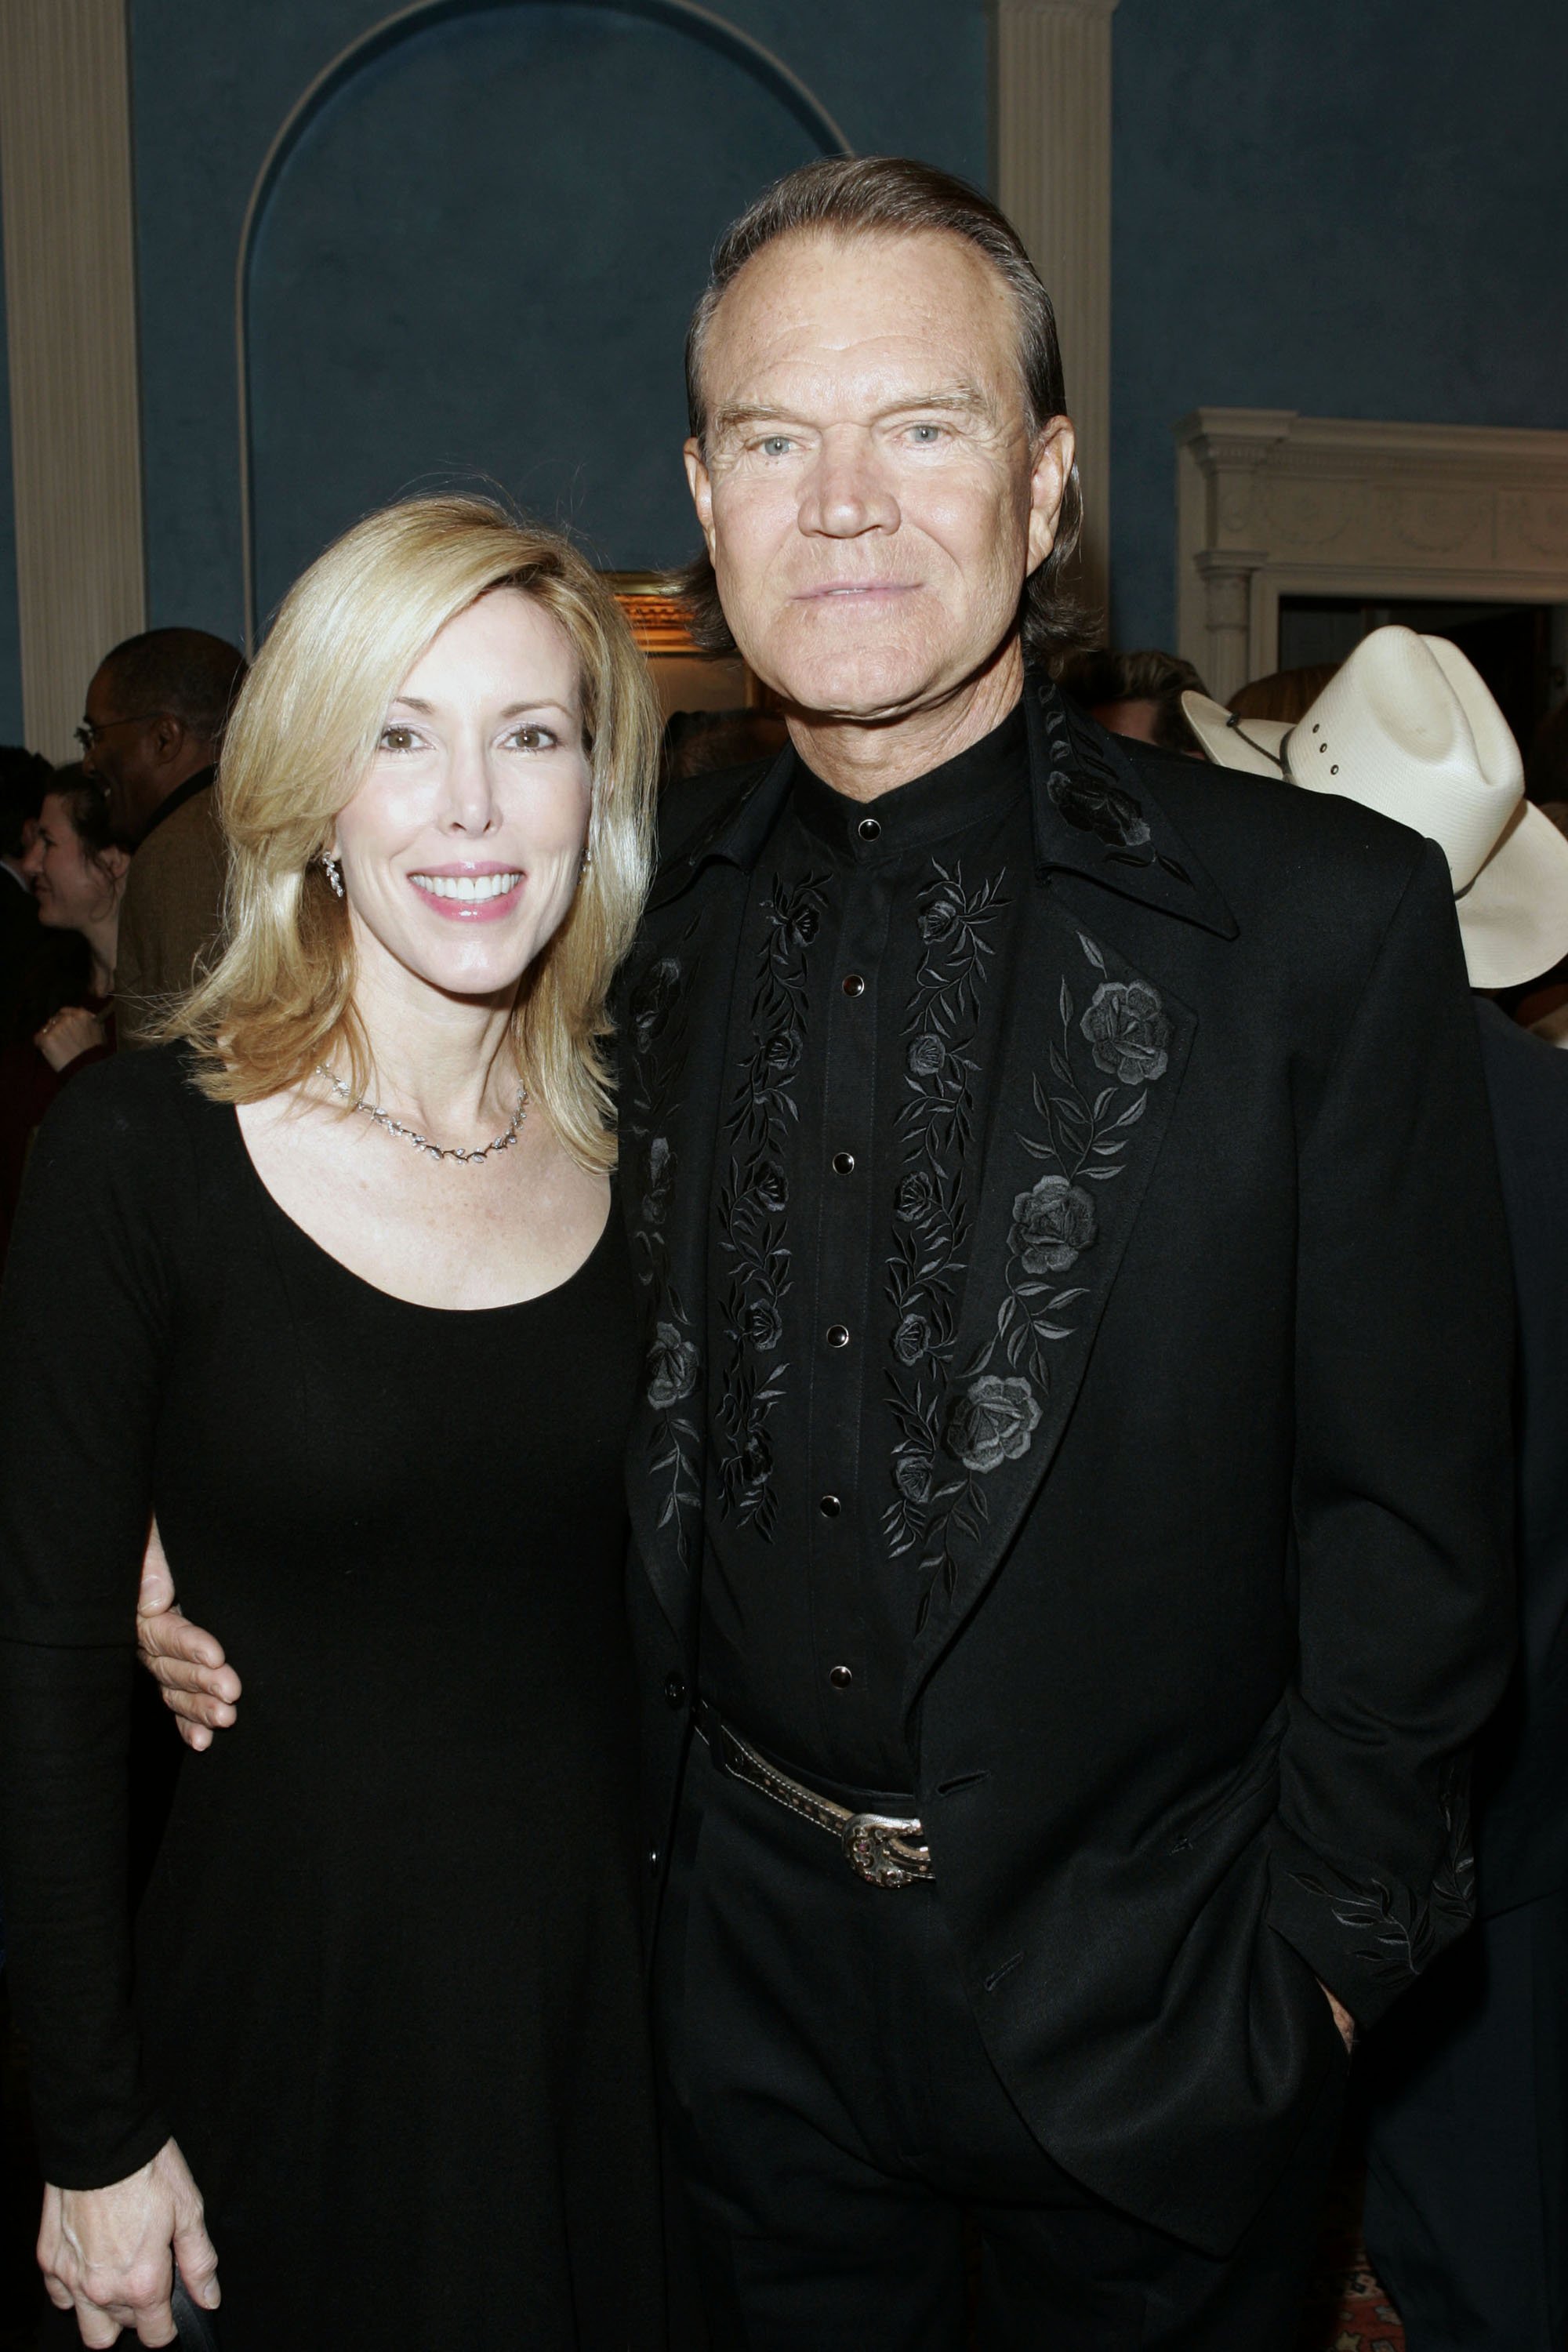 Glenn Campbell and wife Kim Campbell at the 39th CMA Awards on November 14, 2005 | Photo: Getty Images